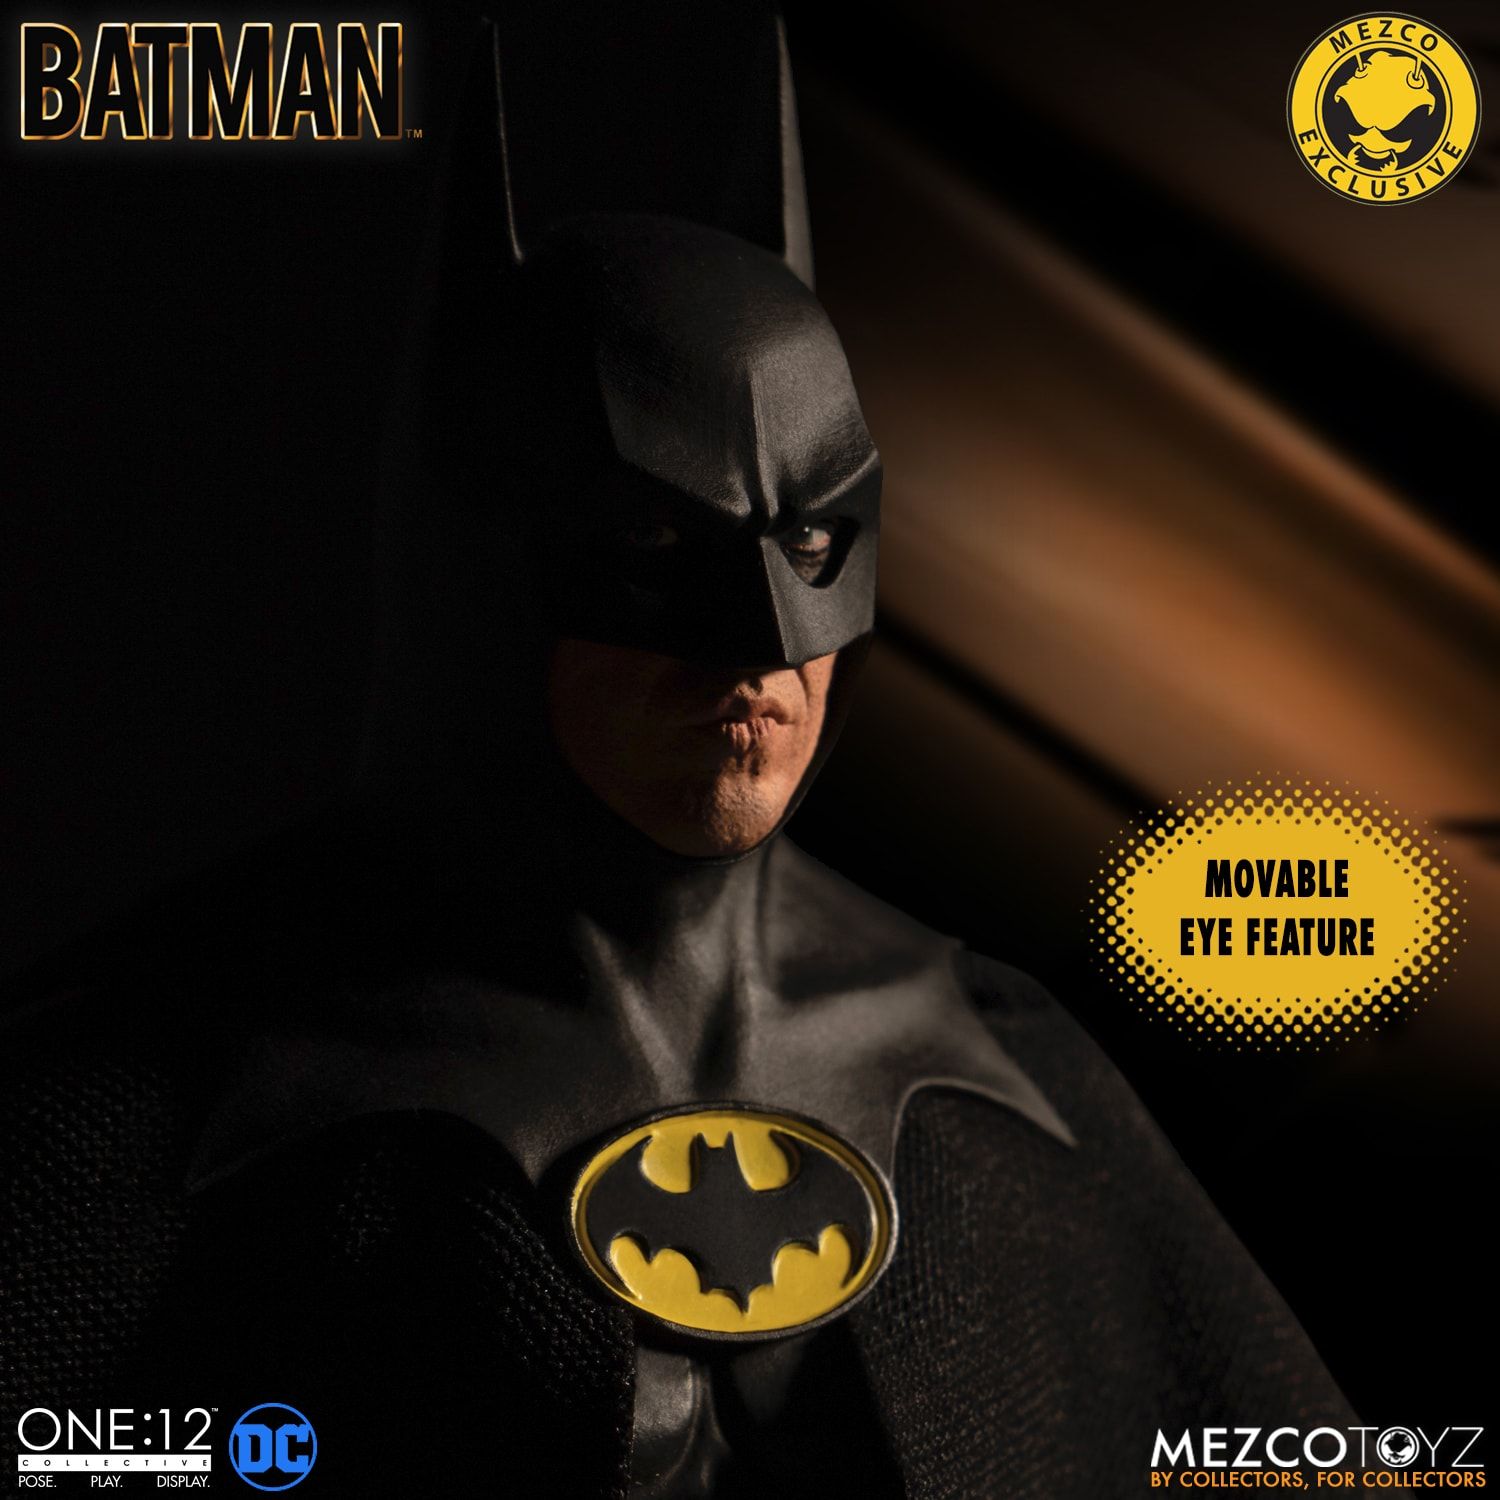 Mezco Batman 1989 Deluxe Stylized 6" Action Figure* BRAND NEW* FREE US SHIPPING* 